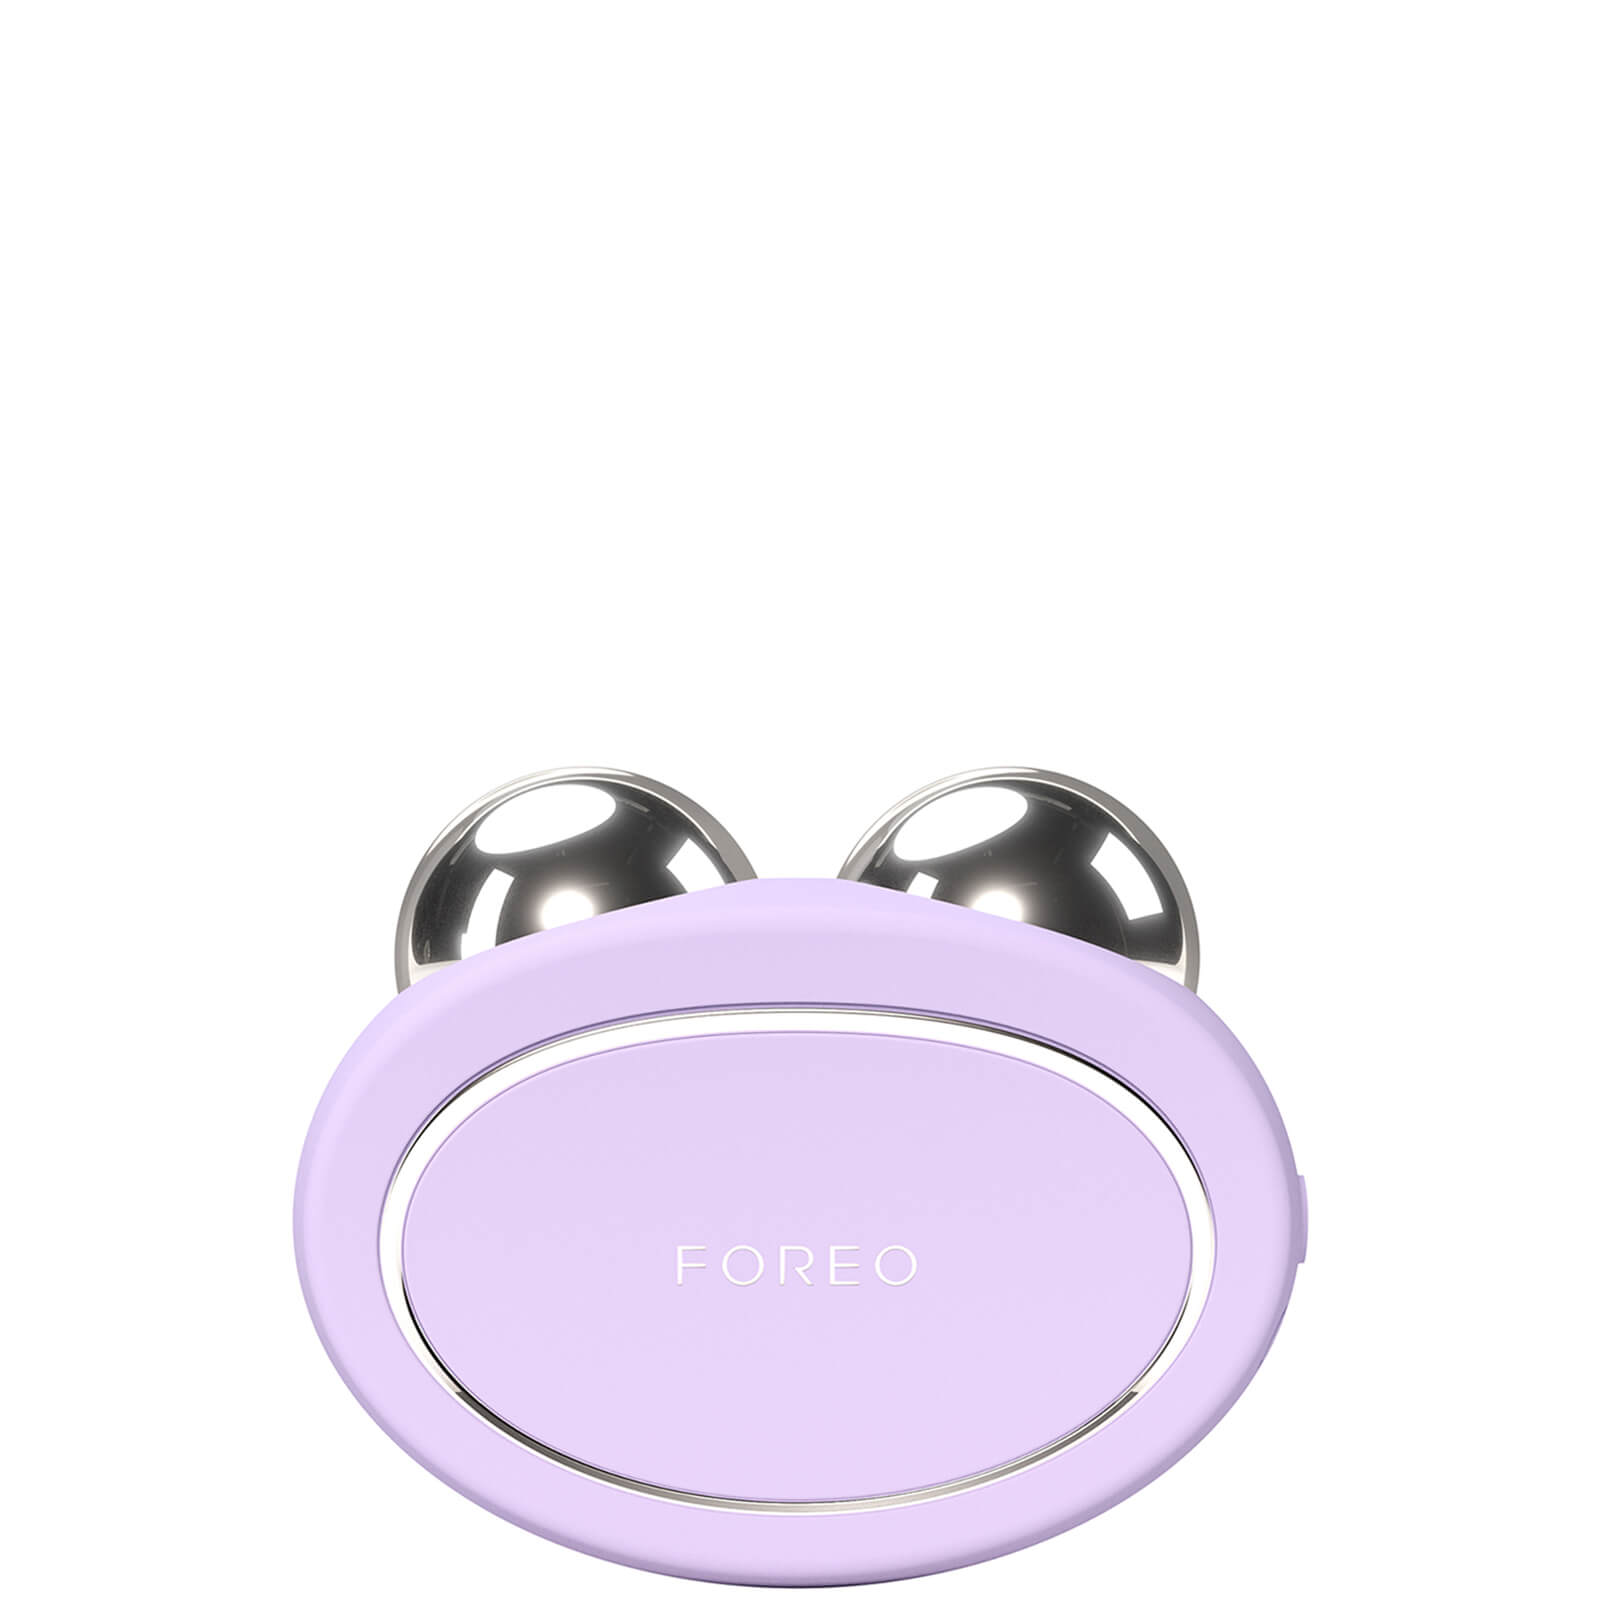 Photos - Facial / Body Cleansing Product Foreo BEAR 2 Facial Toning Device - Lavender 